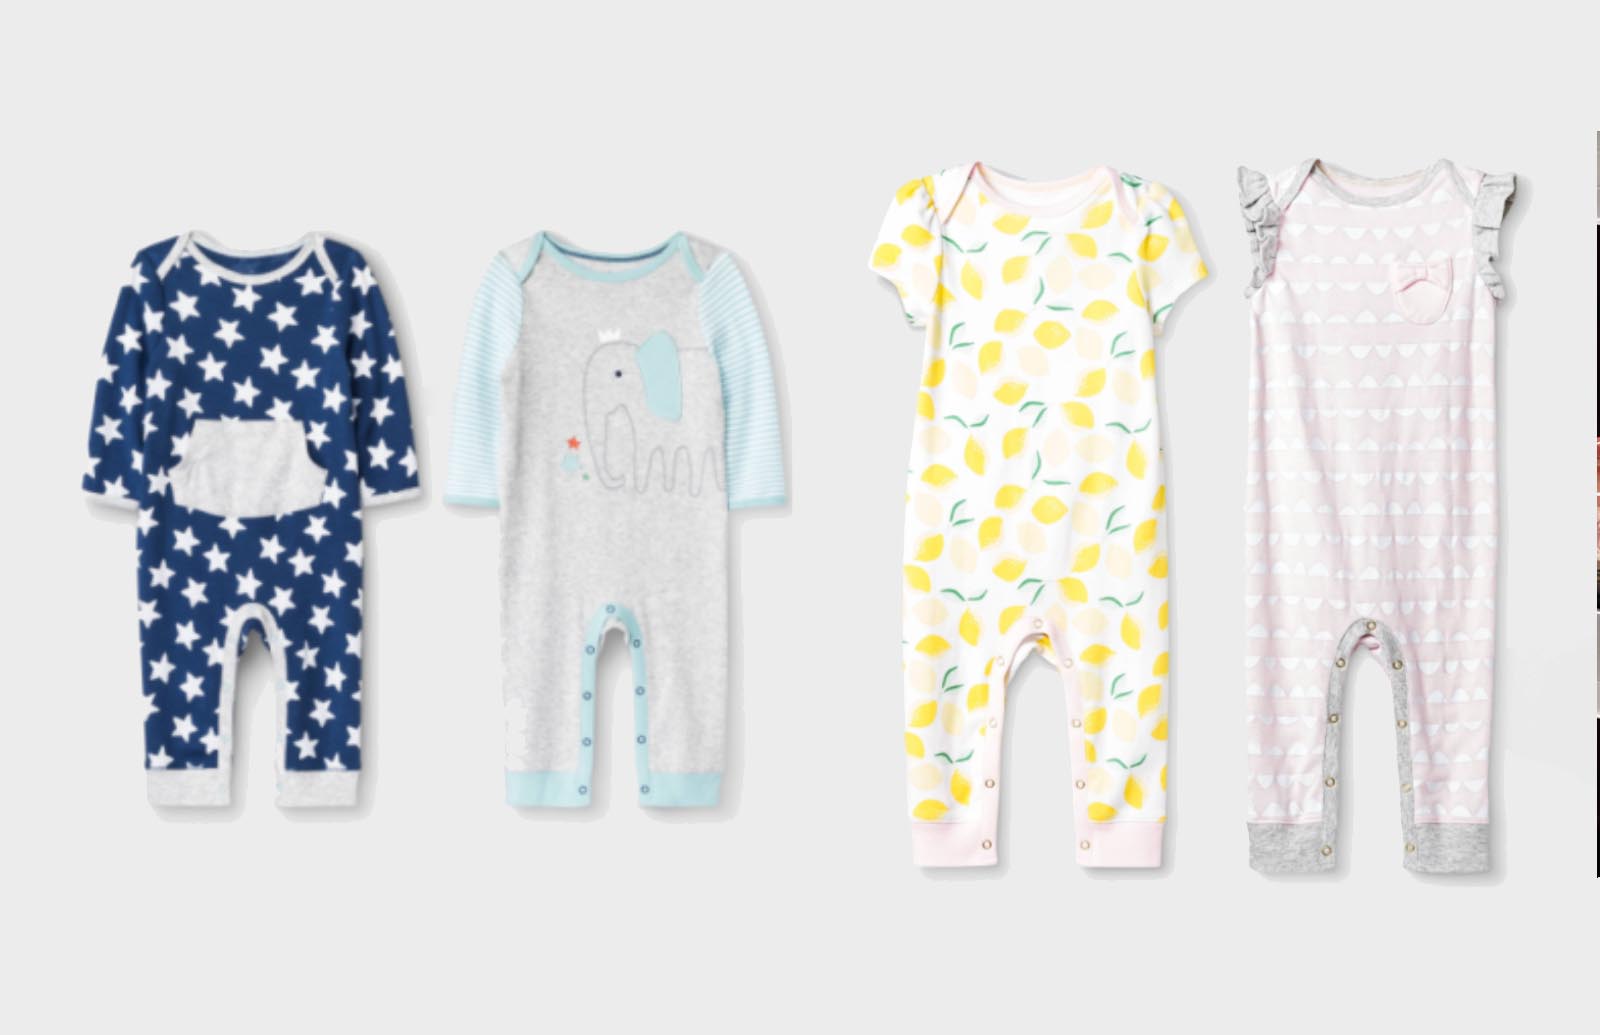 There is a huge recall of children’s clothing sold in Target stores – BGR